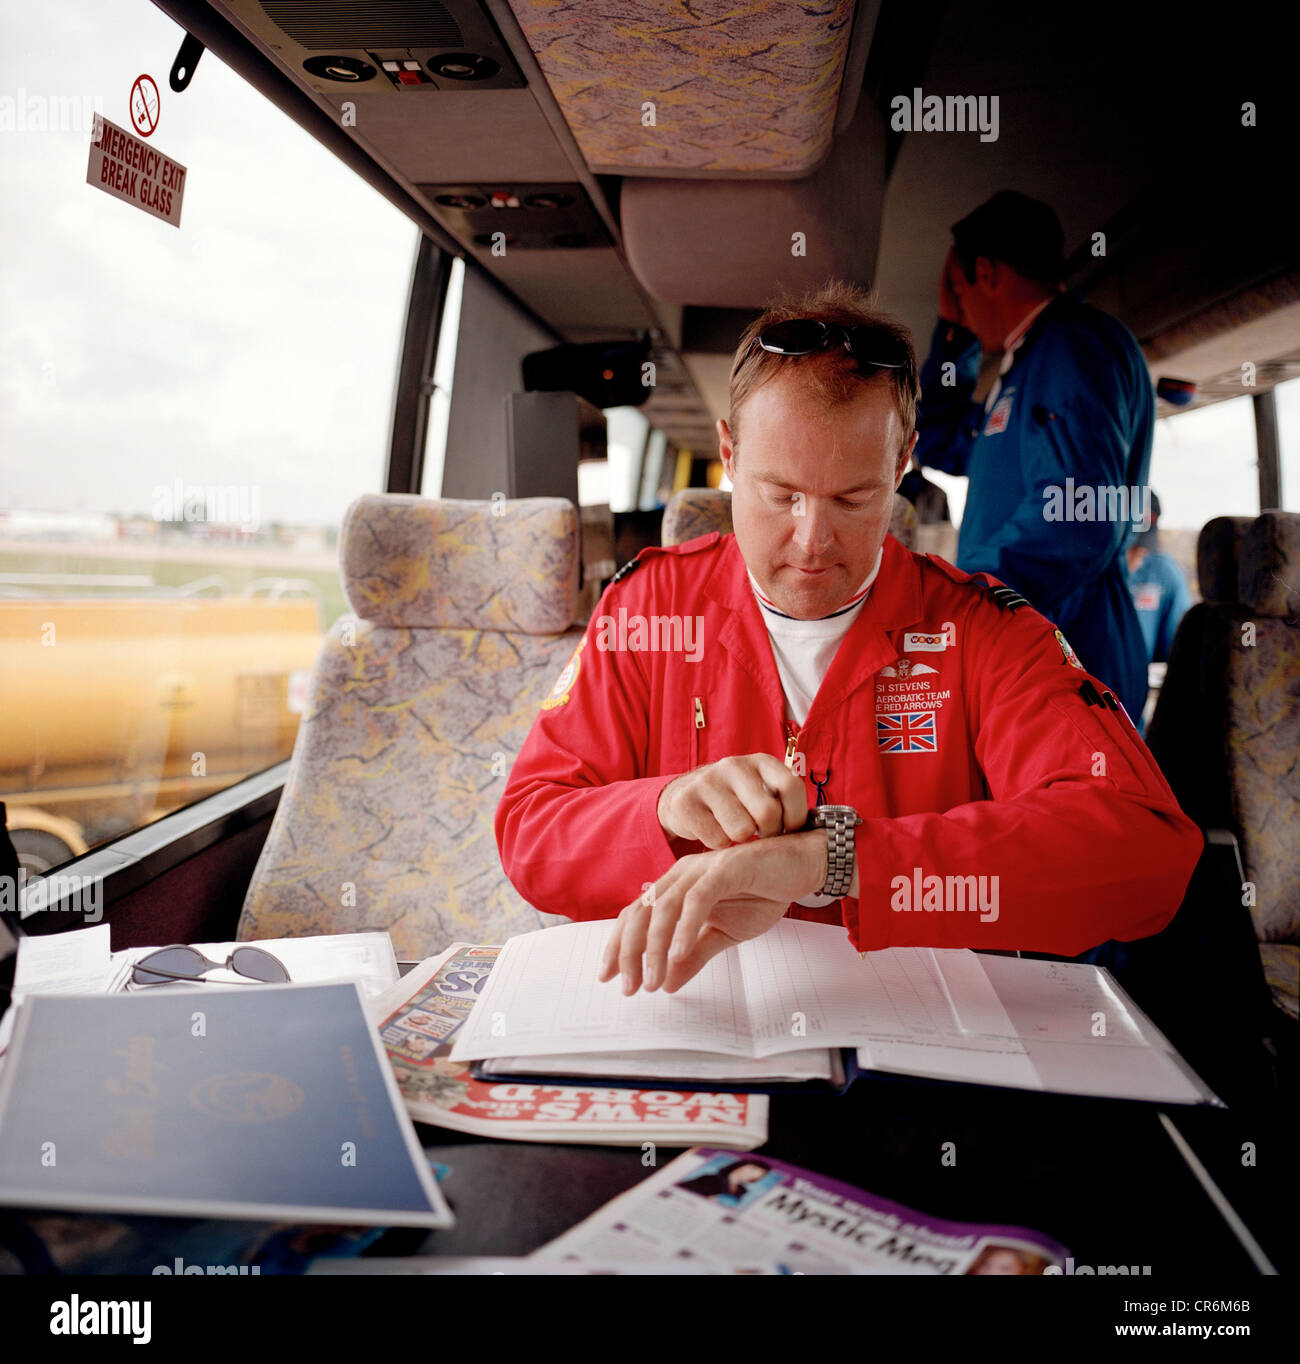 Pilot of the Red Arrows, Britain's RAF aerobatic team checks timings of forthcoming airshow display in team coach. Stock Photo